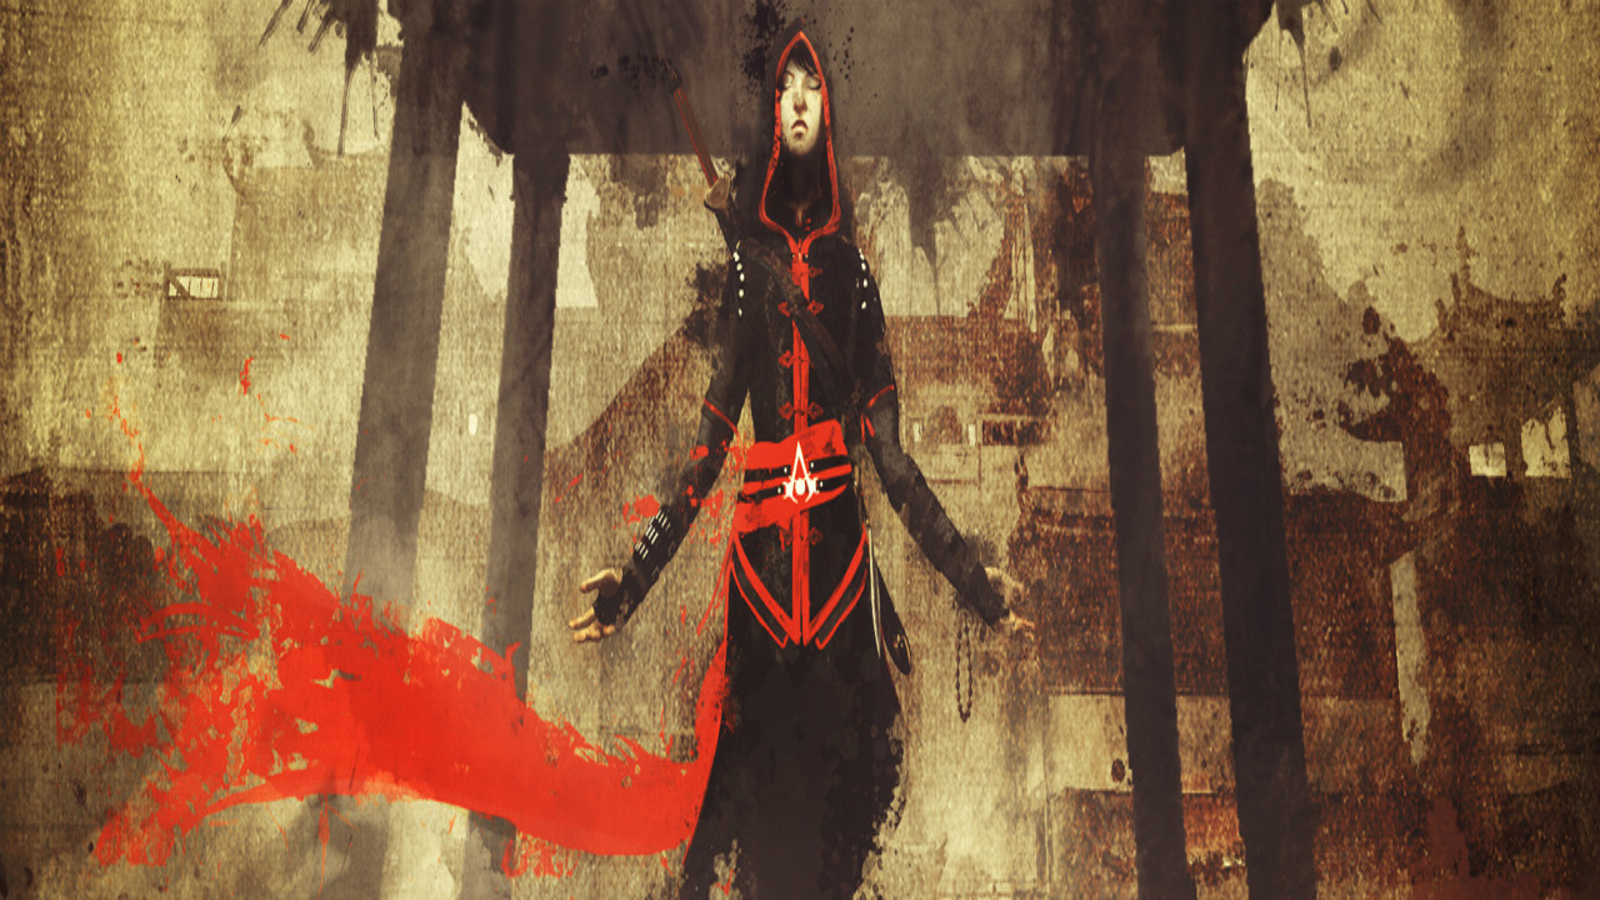 Assassin's Creed Chronicles: China - Metacritic